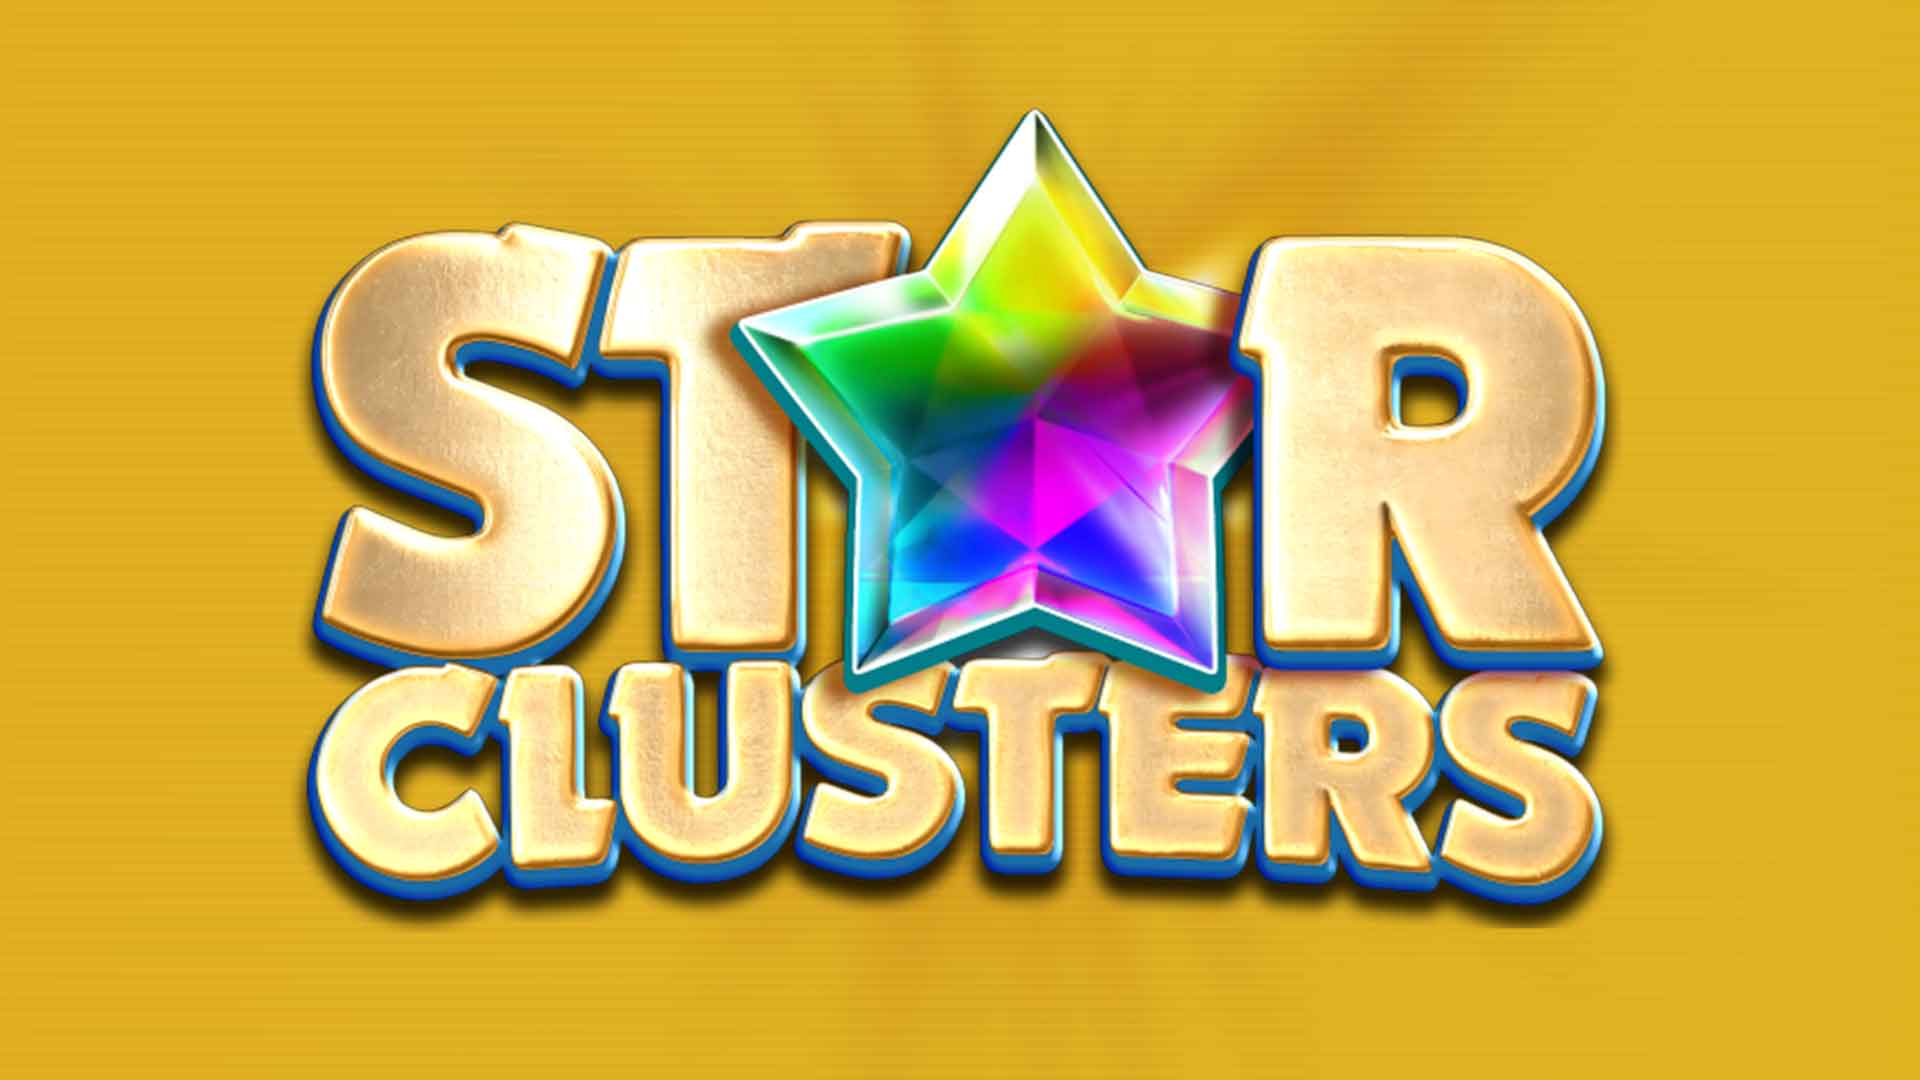 Star Clusters Review